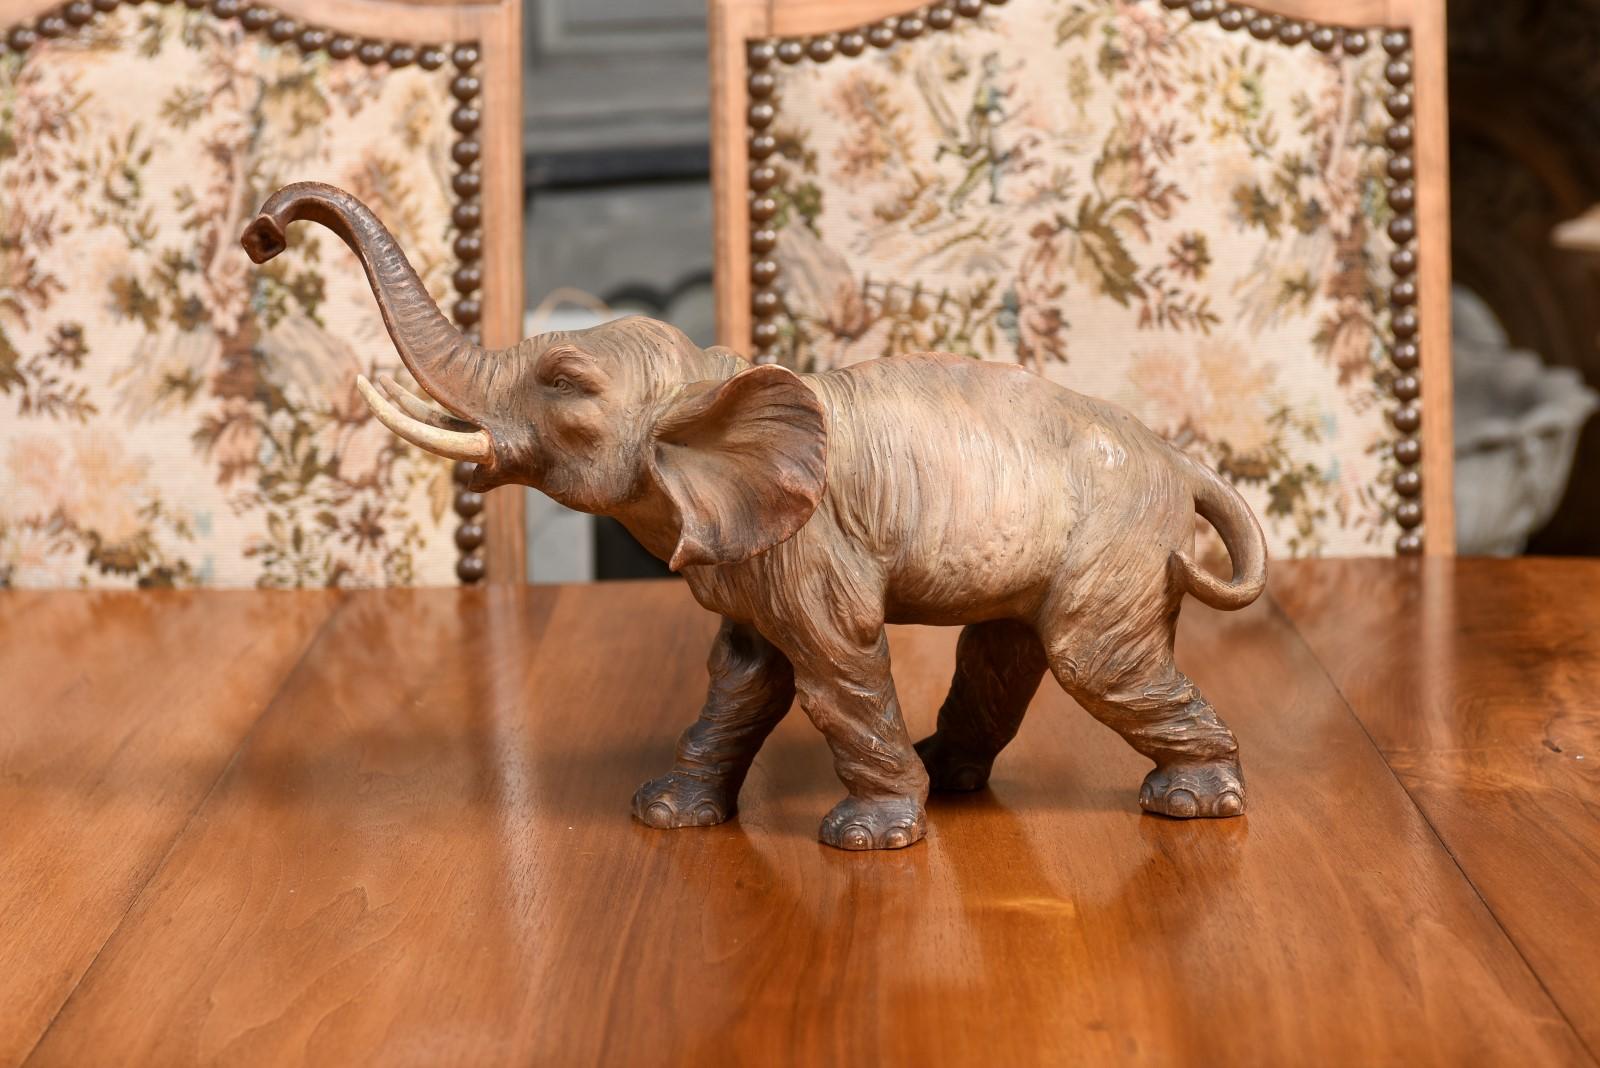 French 19th Century Terracotta Sculpture Depicting a Walking Asian Elephant For Sale 4